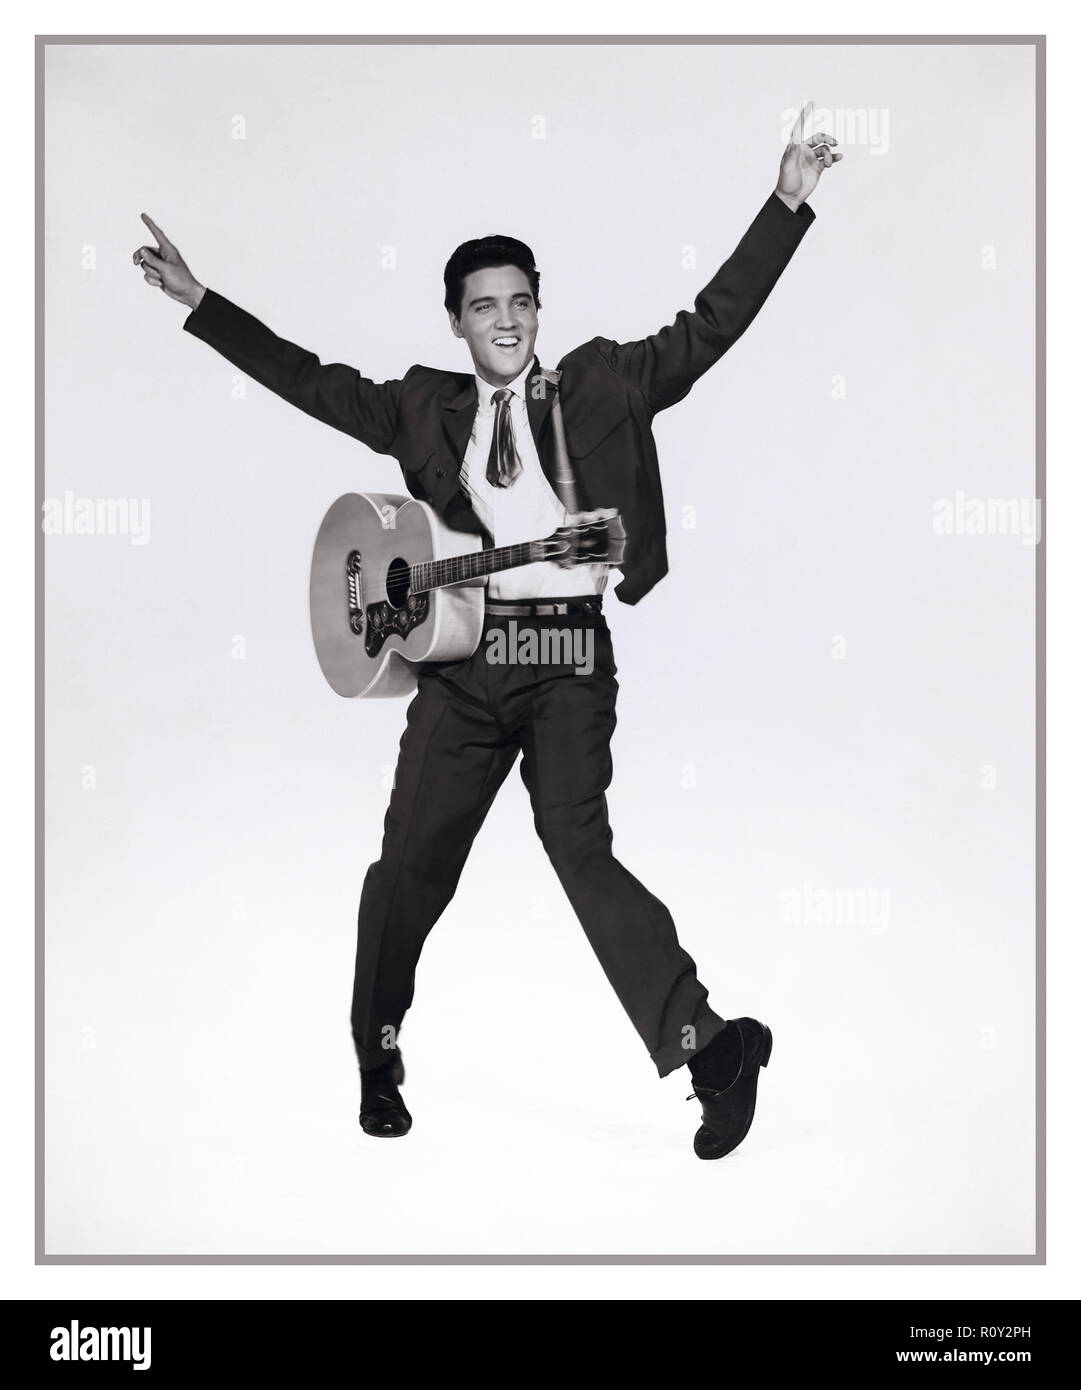 ELVIS PRESLEY with guitar, film still from King Creole 1958 (A rebellious young man takes a job as a nightclub singer to make ends meet, attracting the attention of a local crime boss etc...) Stock Photo